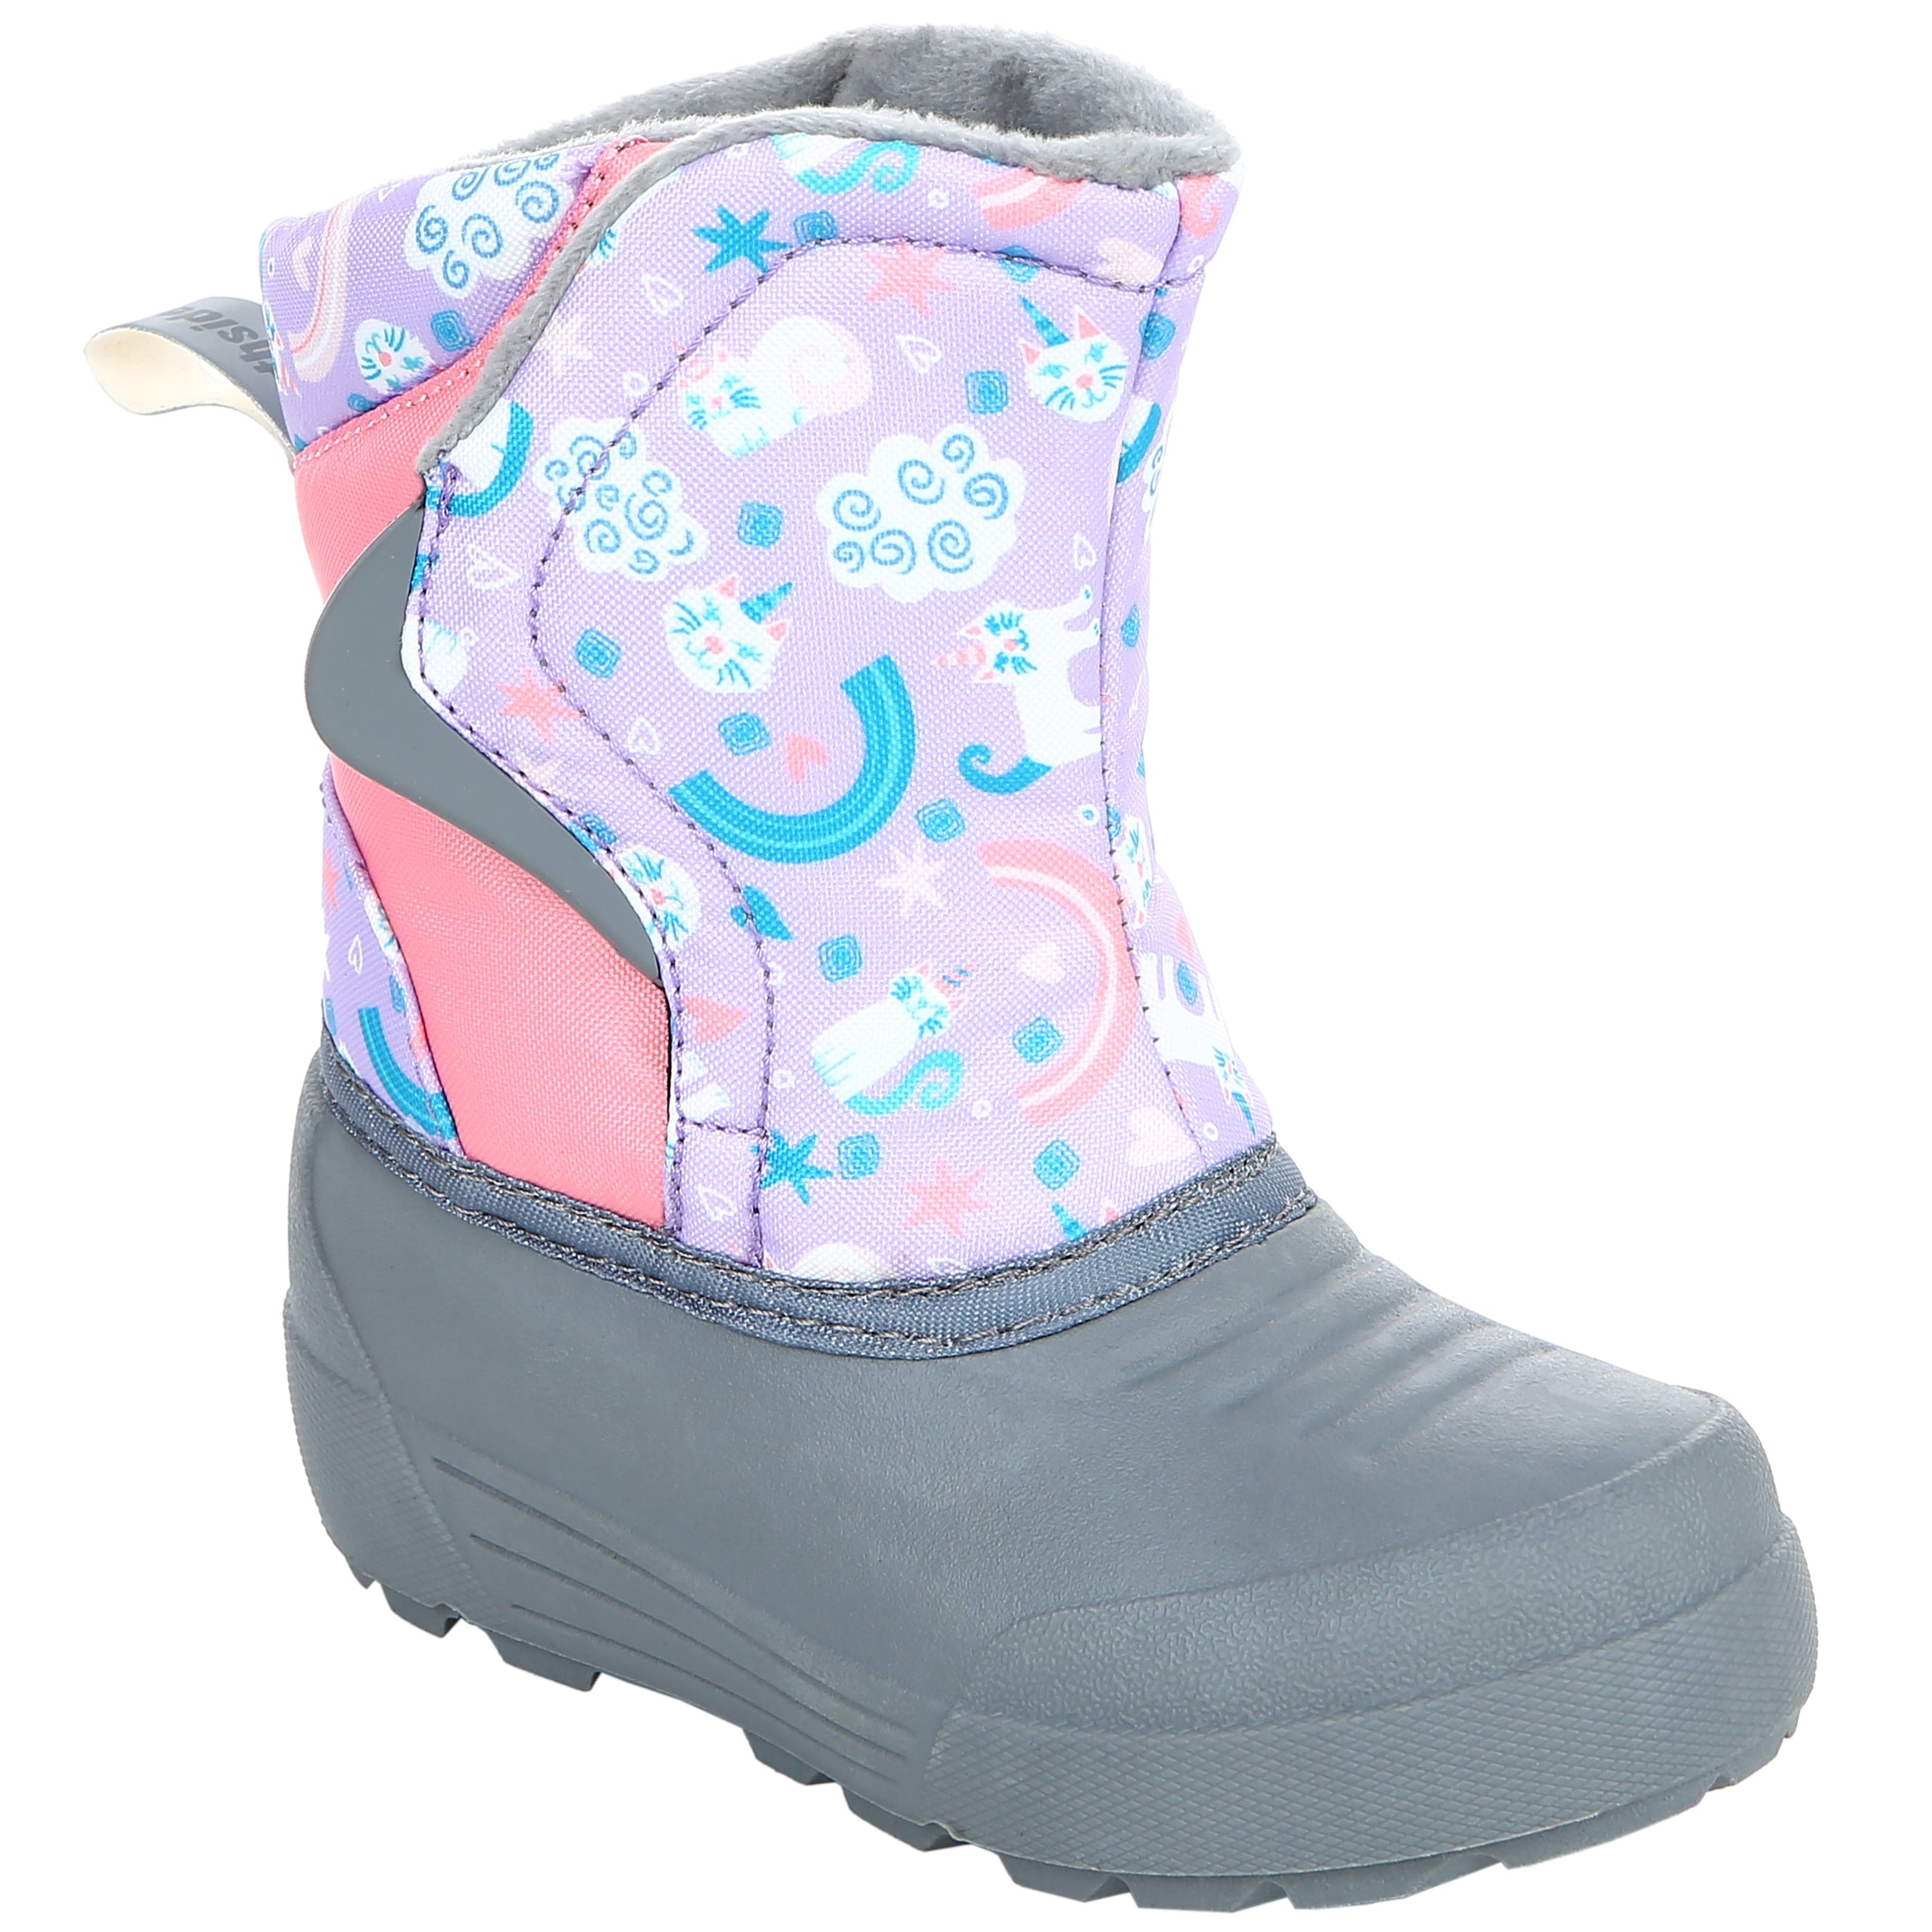 Toddler's Flurrie Insulated Winter Snow Boot